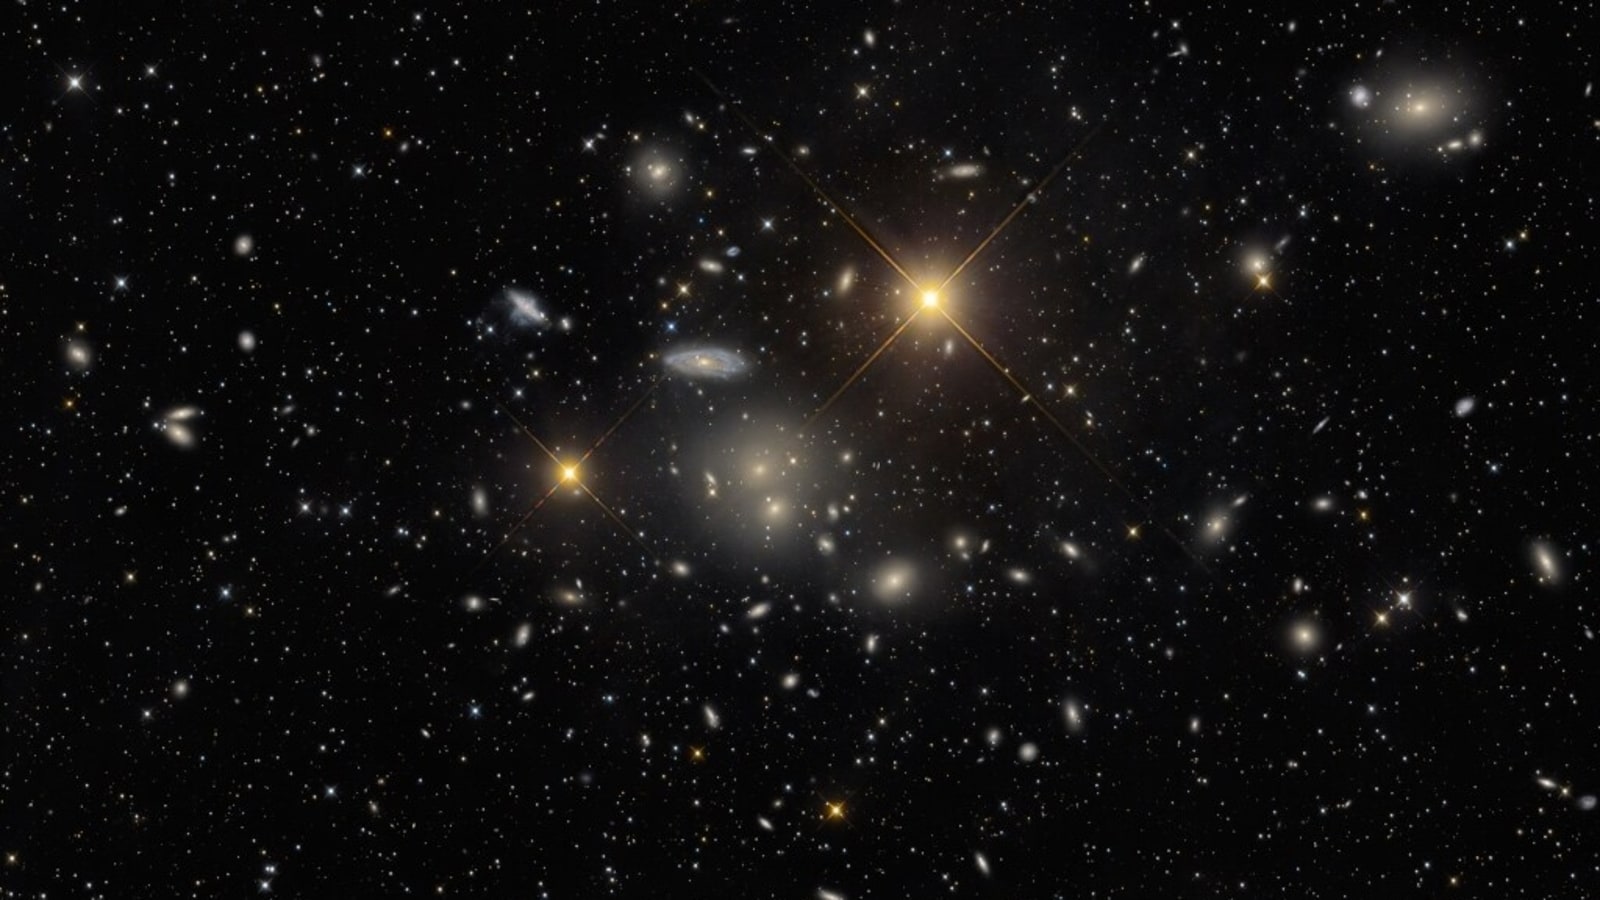 NASA Astronomy Picture of the Day 16 February 2023: Hydra galaxy cluster